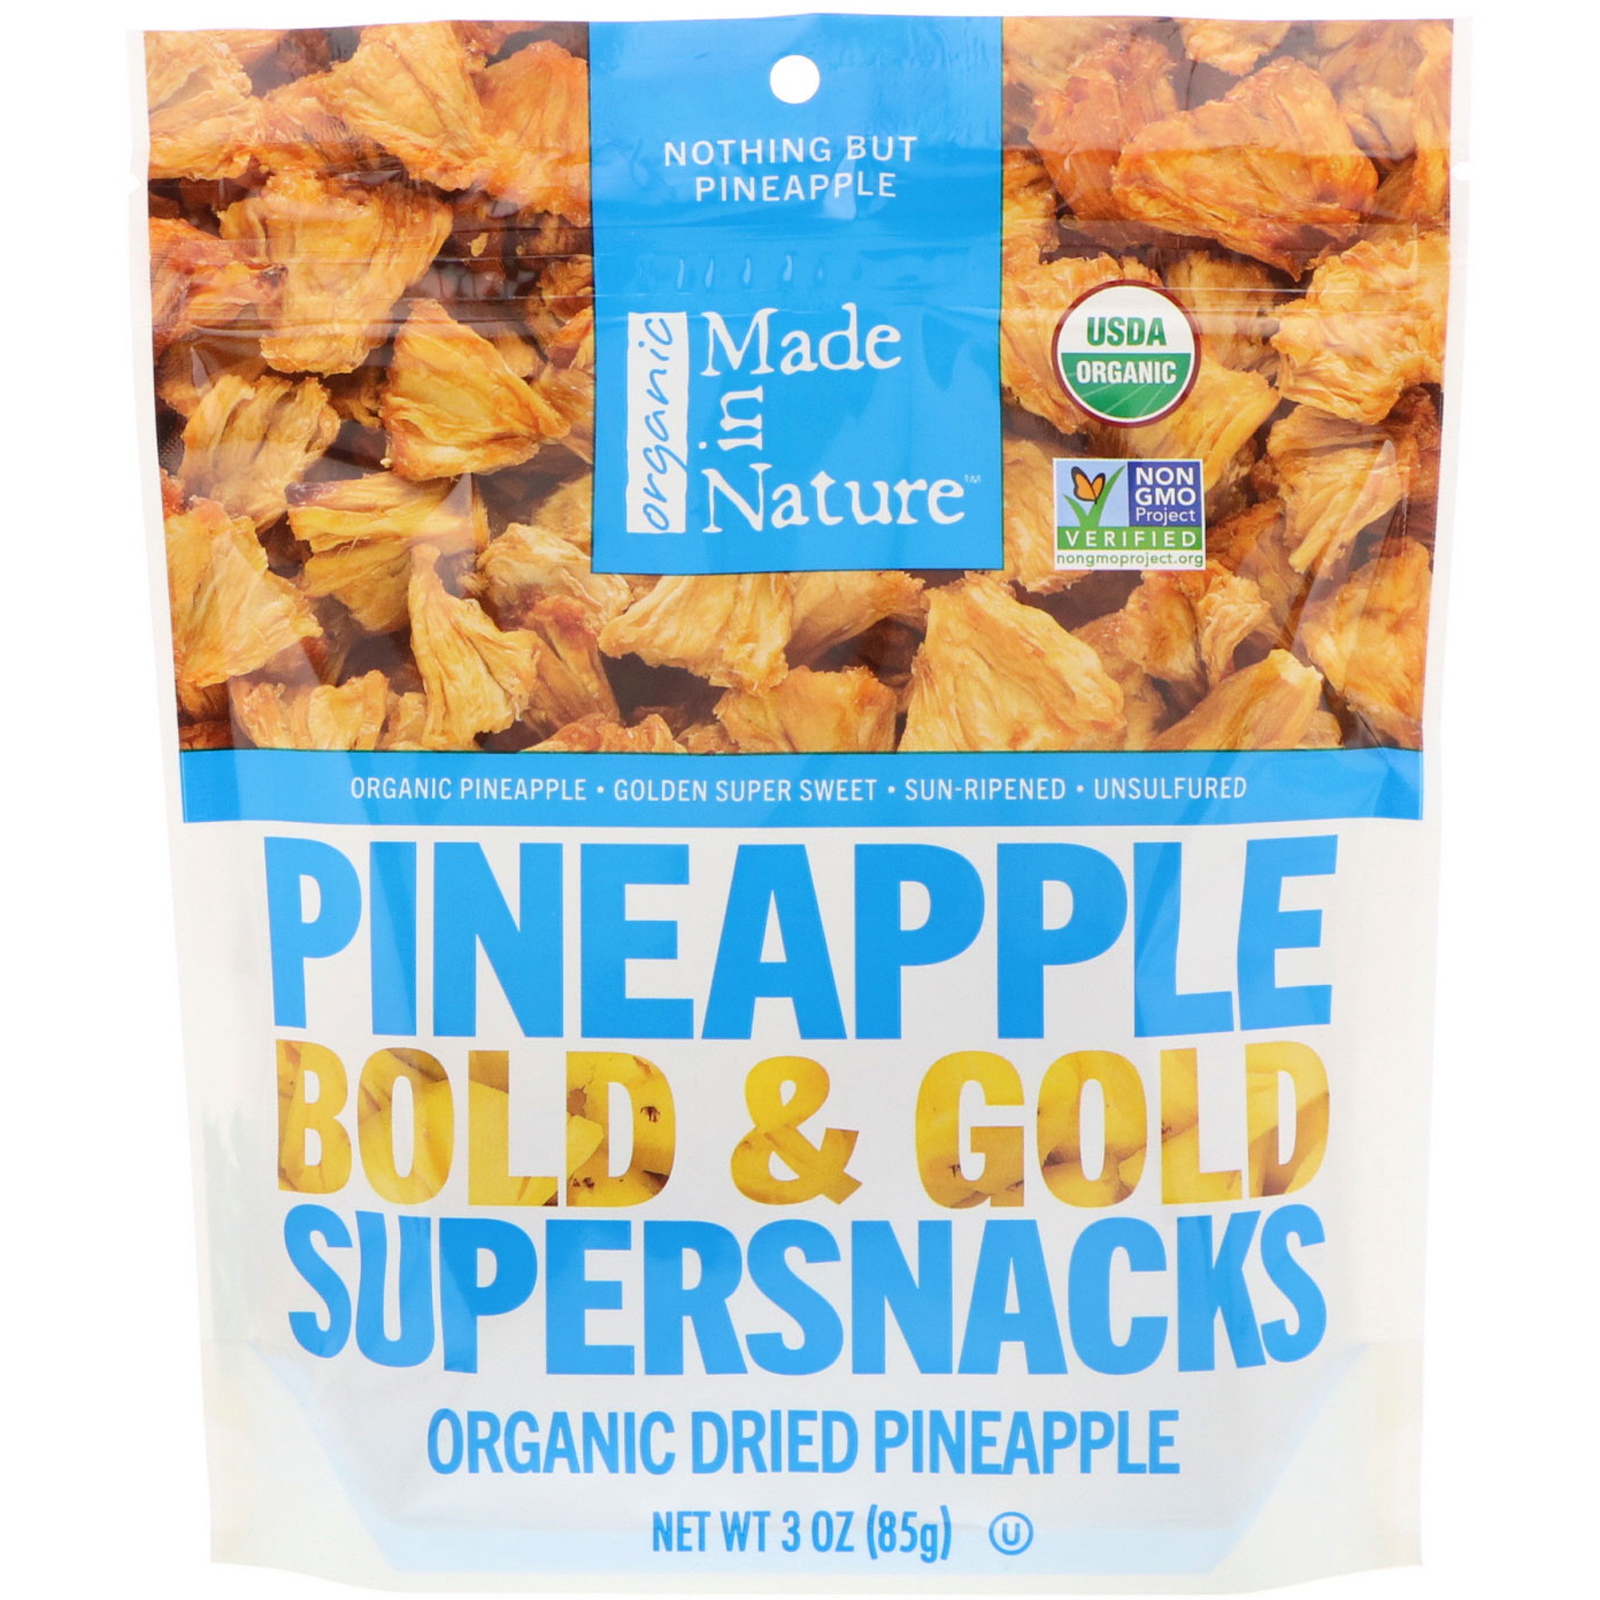 Made in Nature, Organic Dried Pineapple, Bold & Supersnacks, 3 oz (85 g)